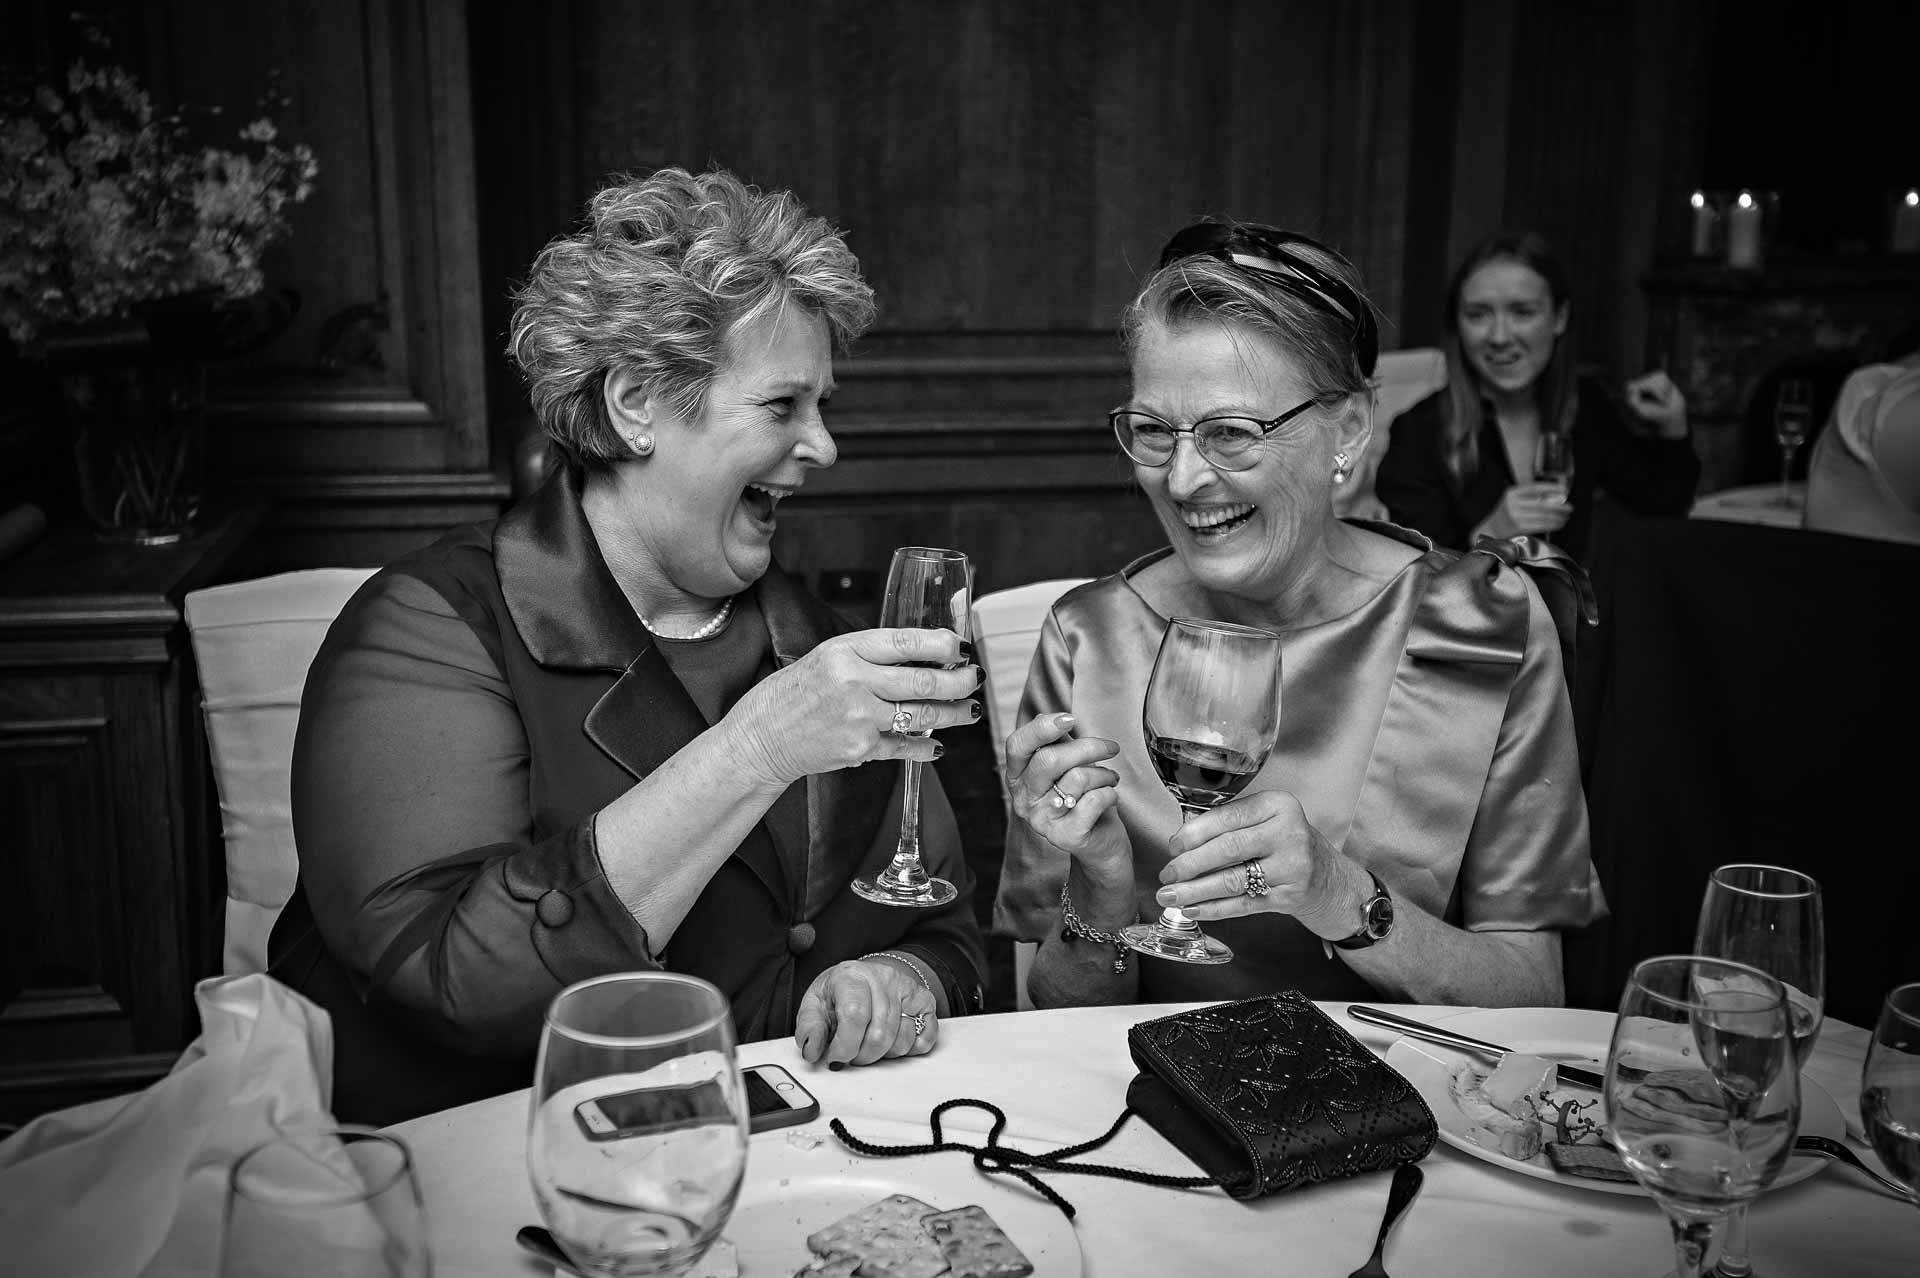 Two ladies laughing at wedding breakfast meal holding wine glasses